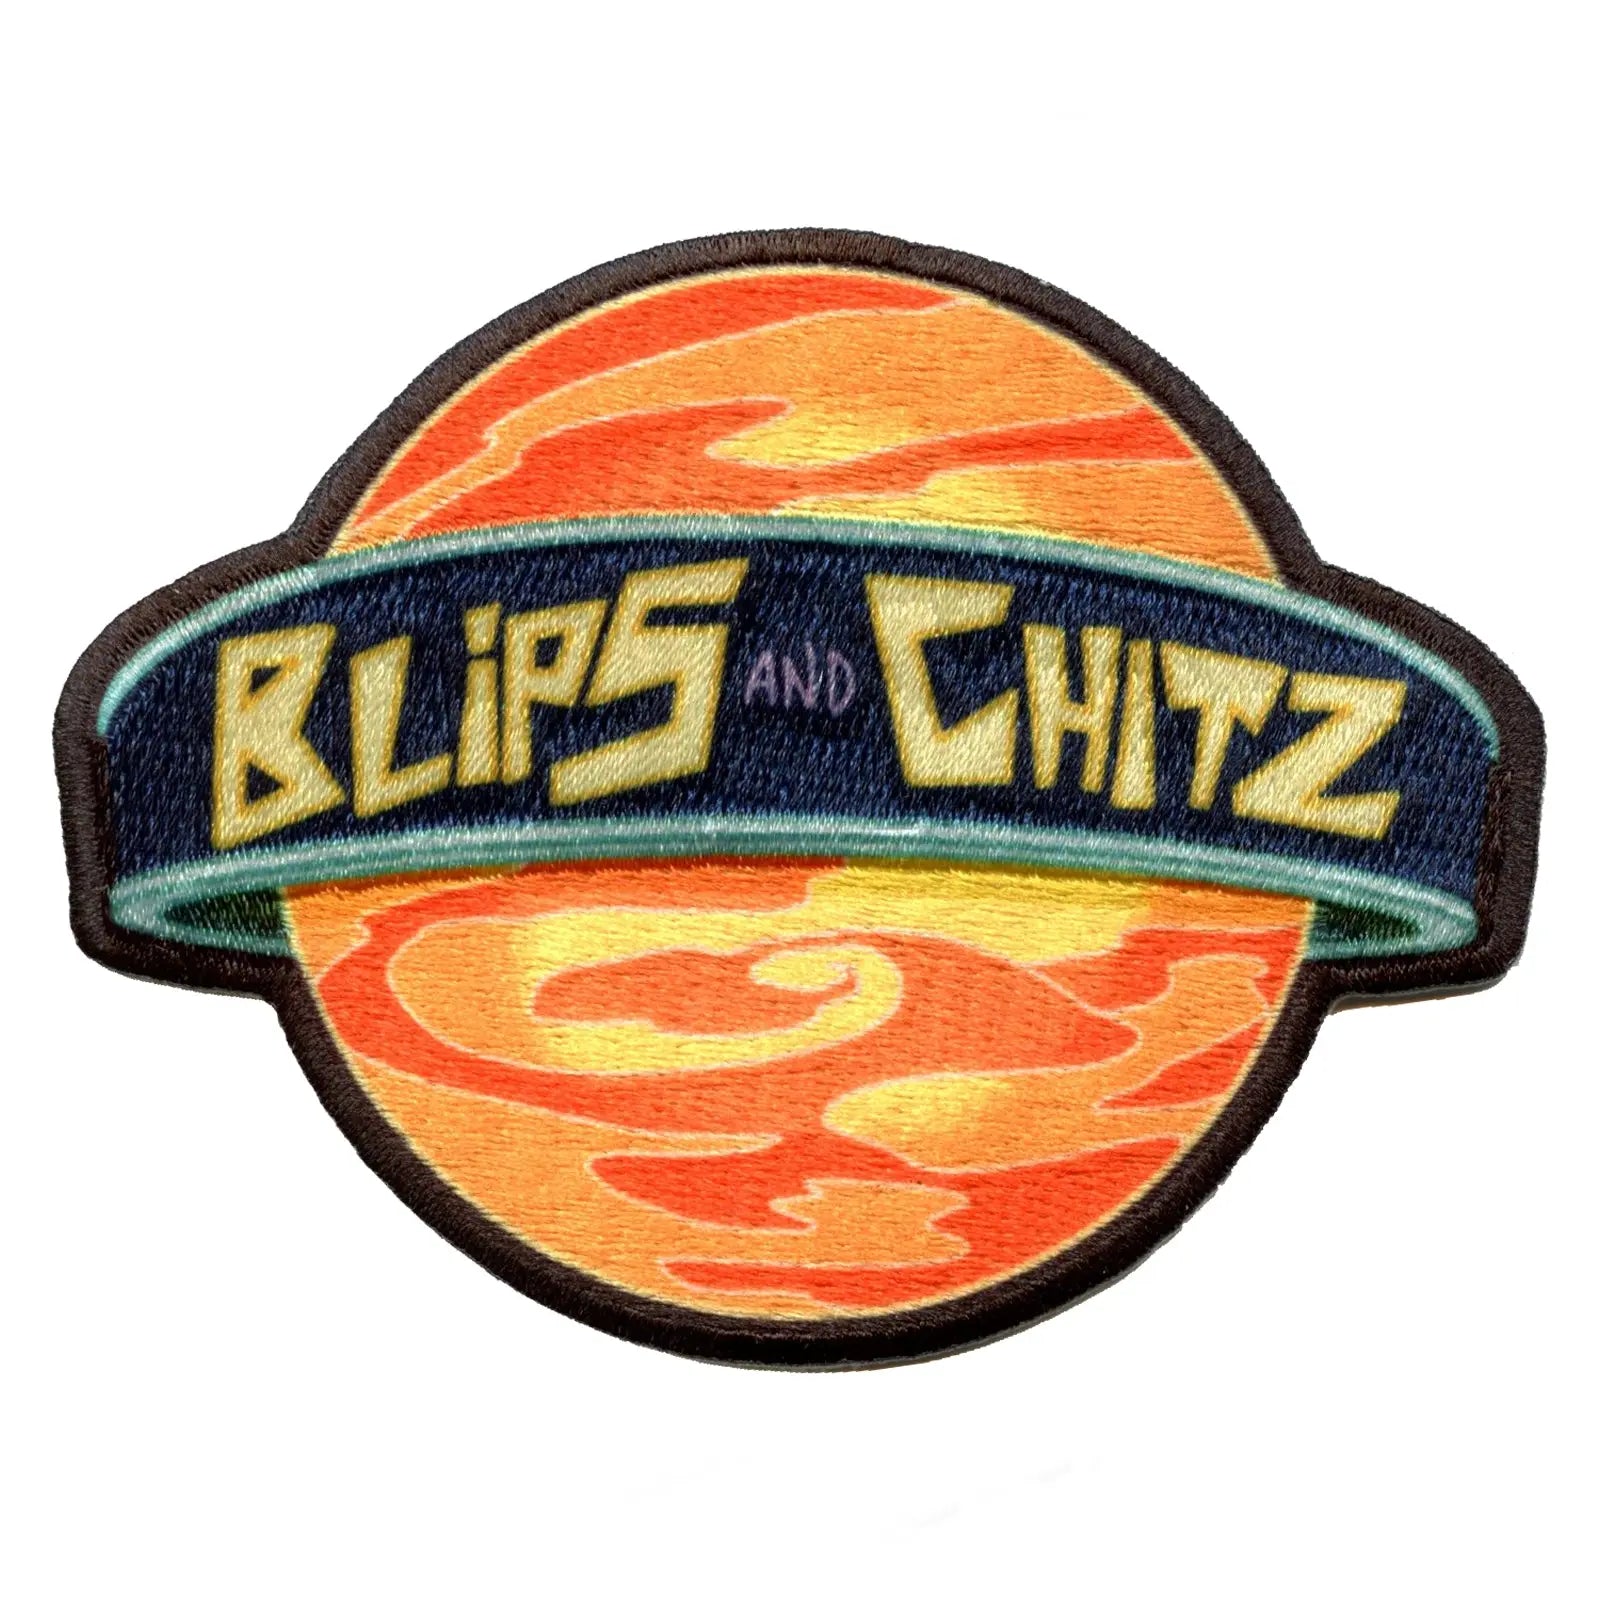 Rick and Morty Blips And Chitz Embroidered Iron On Patch 